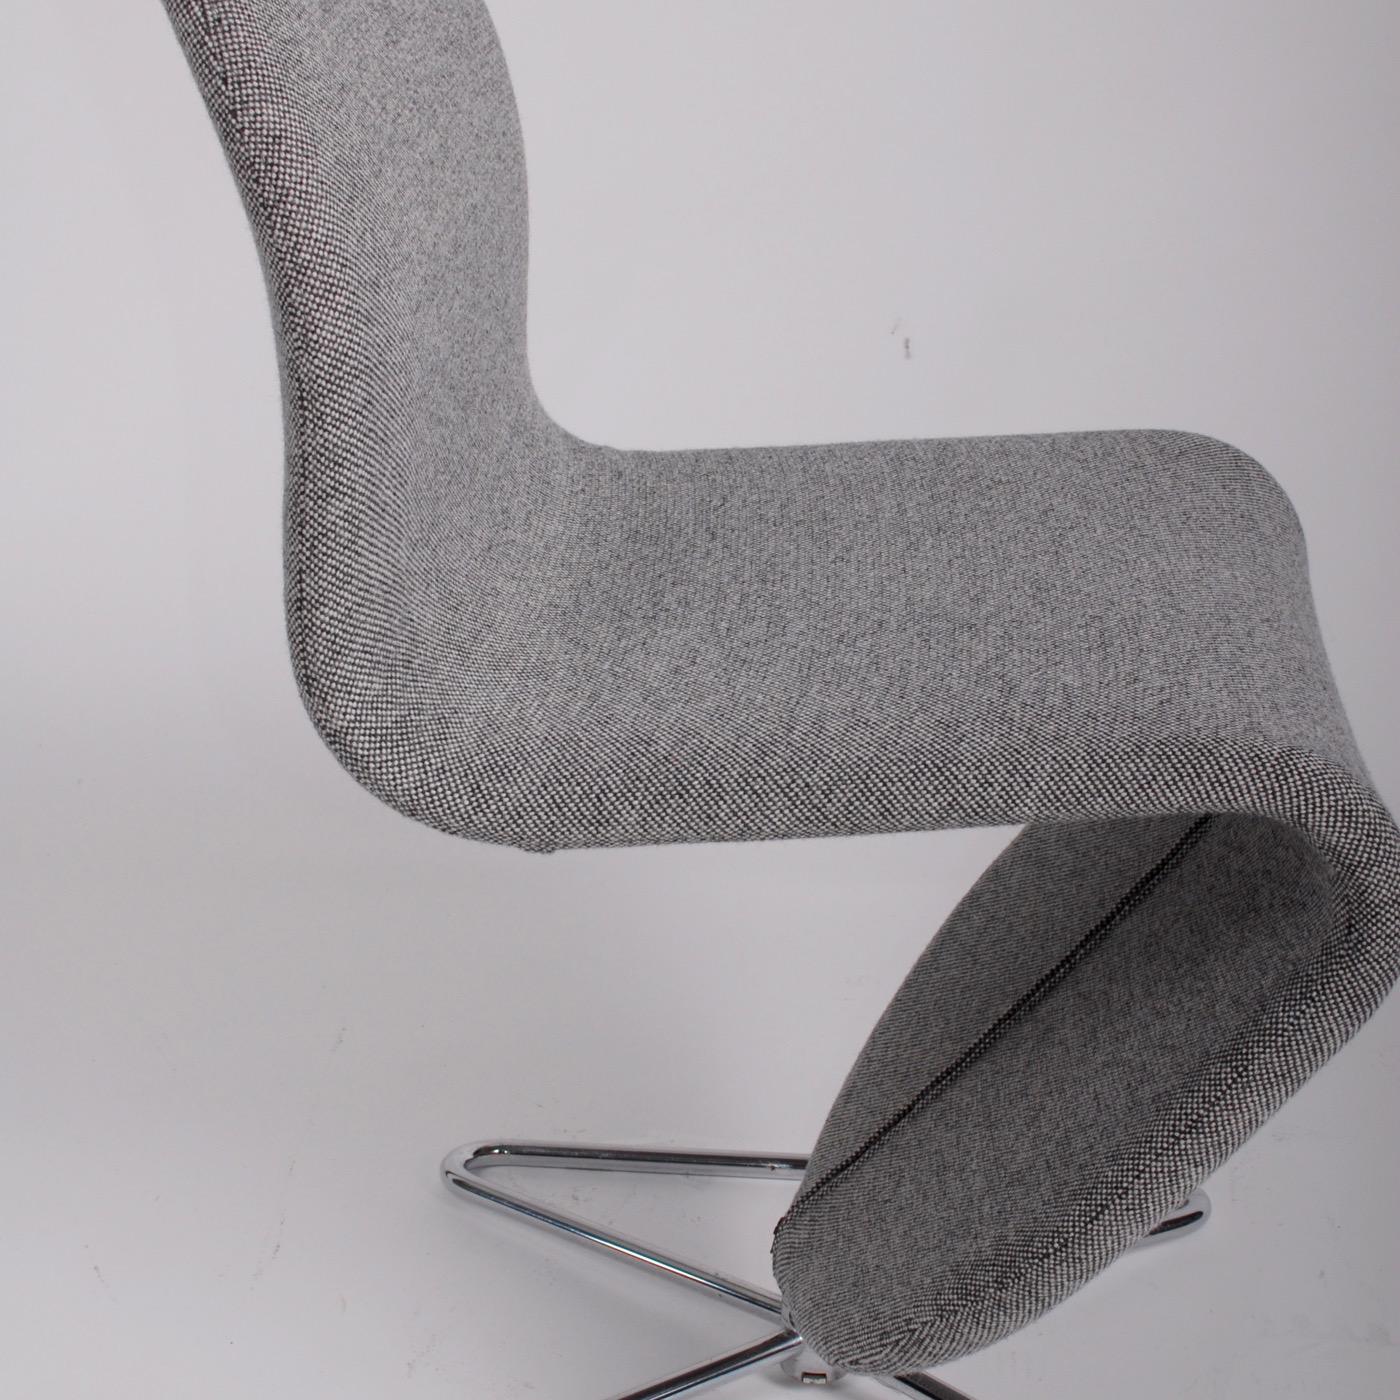 Late 20th Century Space Age Verner Panton Set of Four Chairs 123 Serie Fritz Hansen Wool Fabric